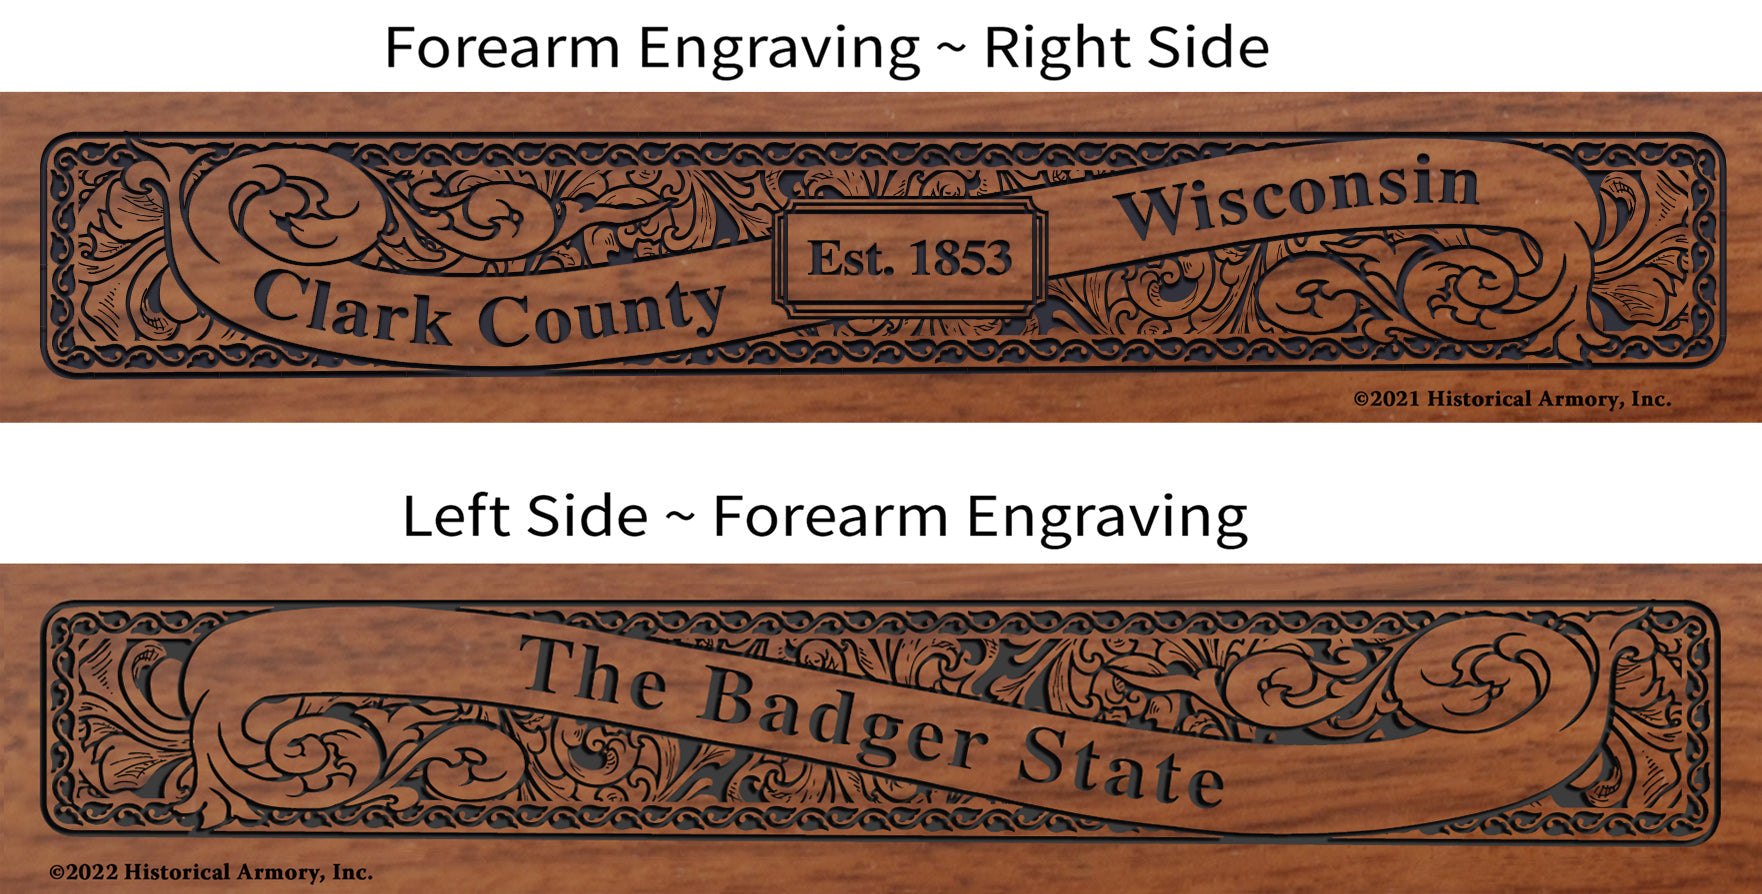 Clark County Wisconsin Engraved Rifle Forearm